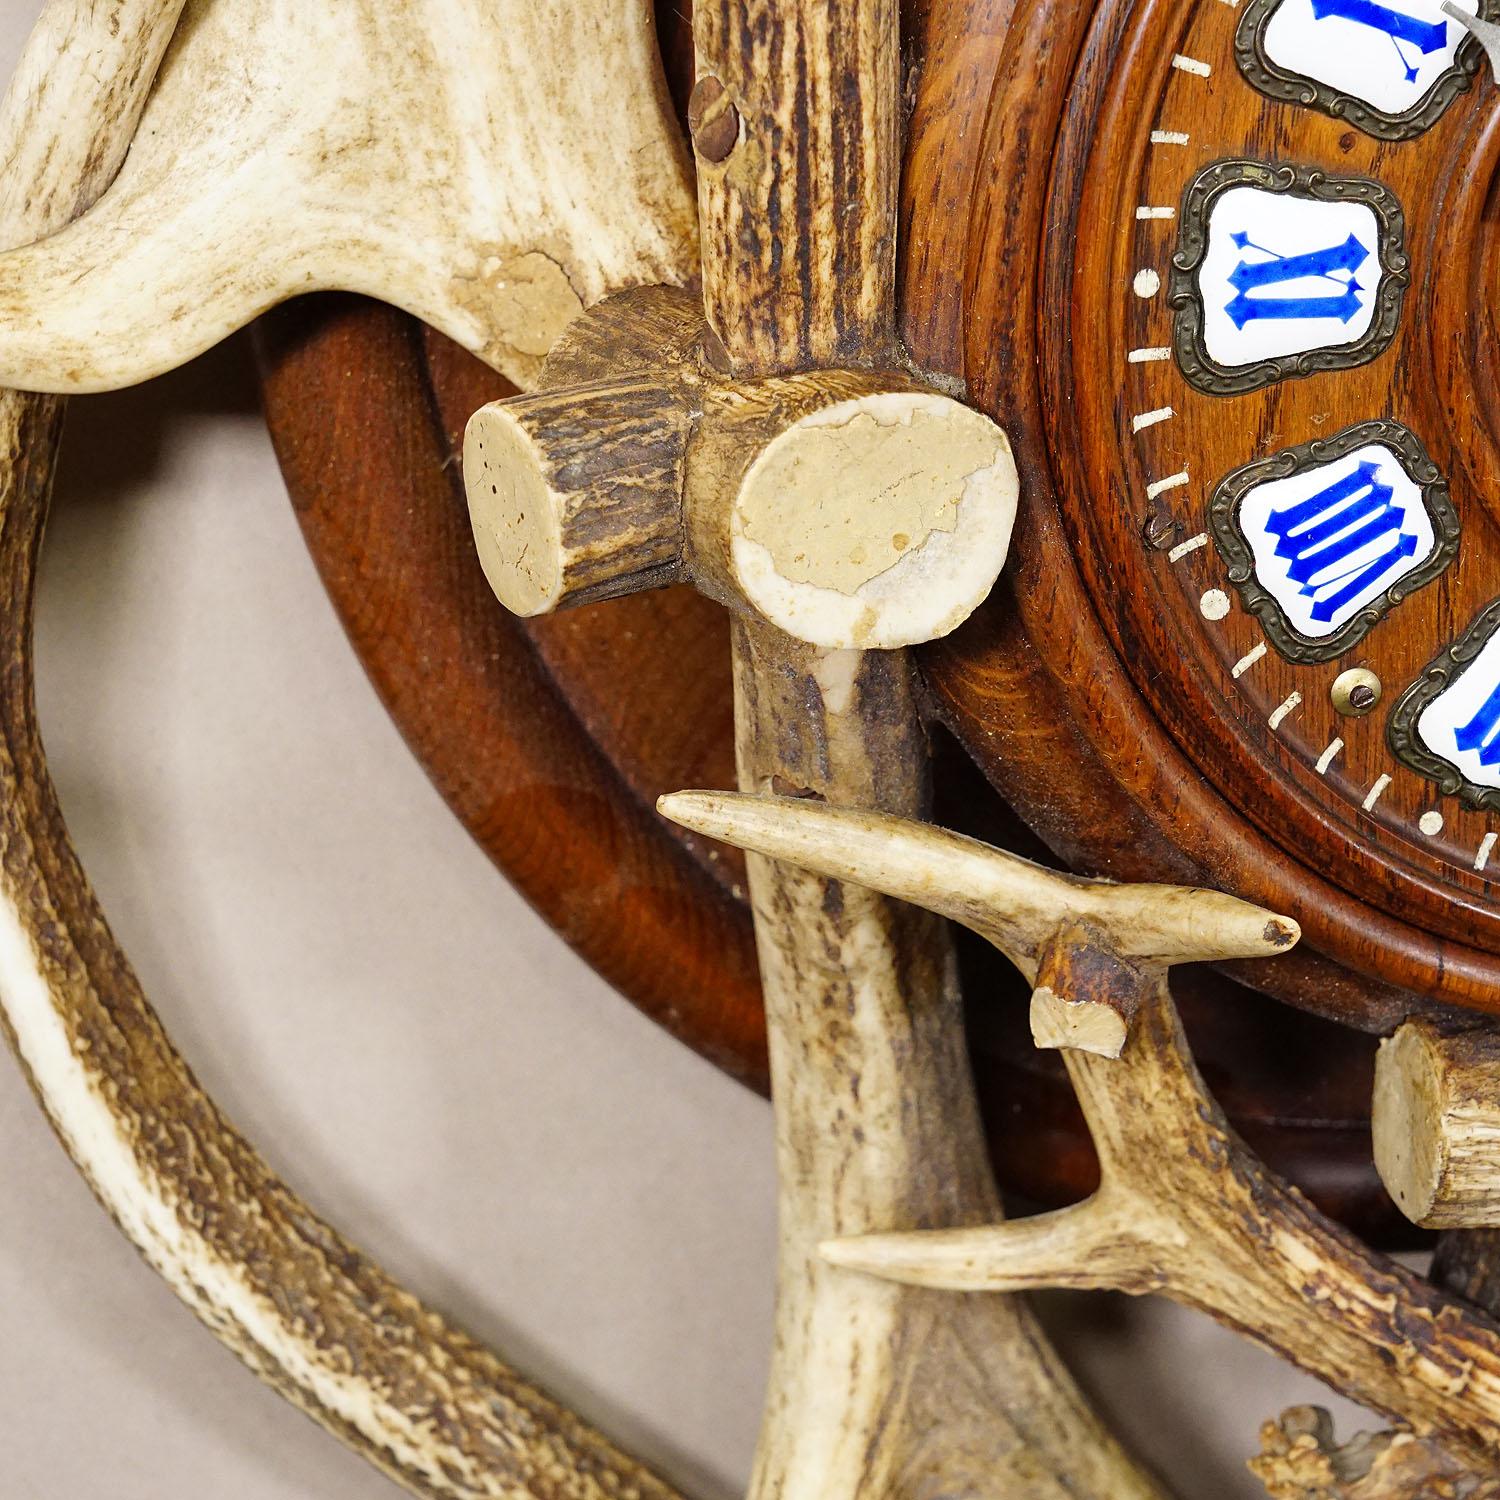 Antique Cabin Antler Wall Clock with Deer Head Austria ca. 1900 For Sale 2